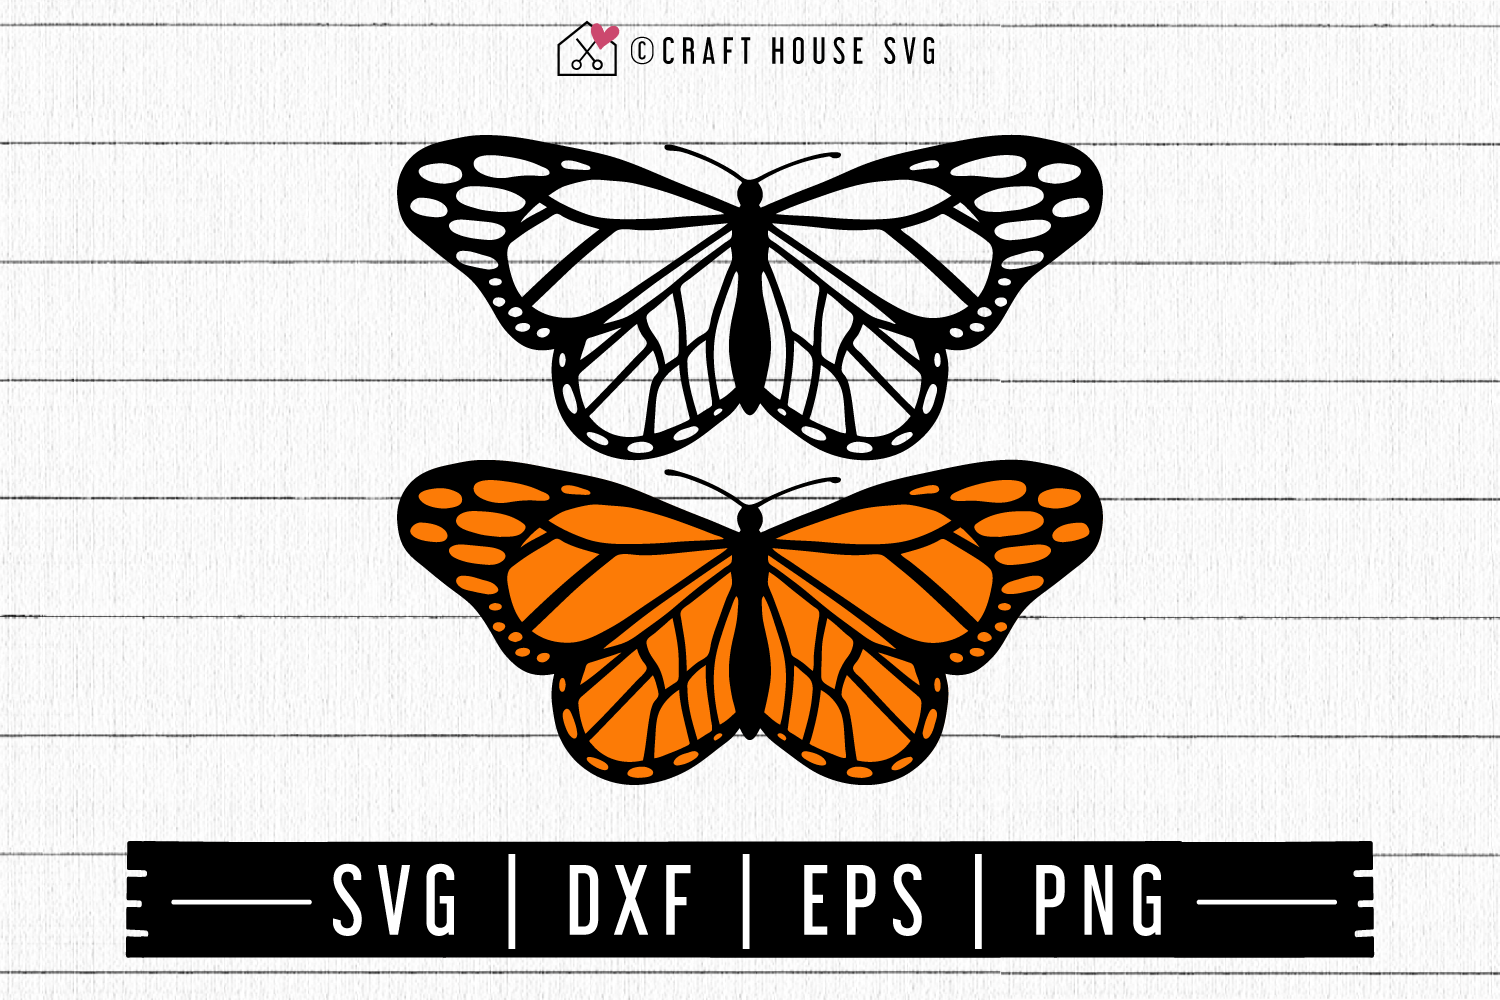 Download FREE Butterfly SVG - Craft House SVG